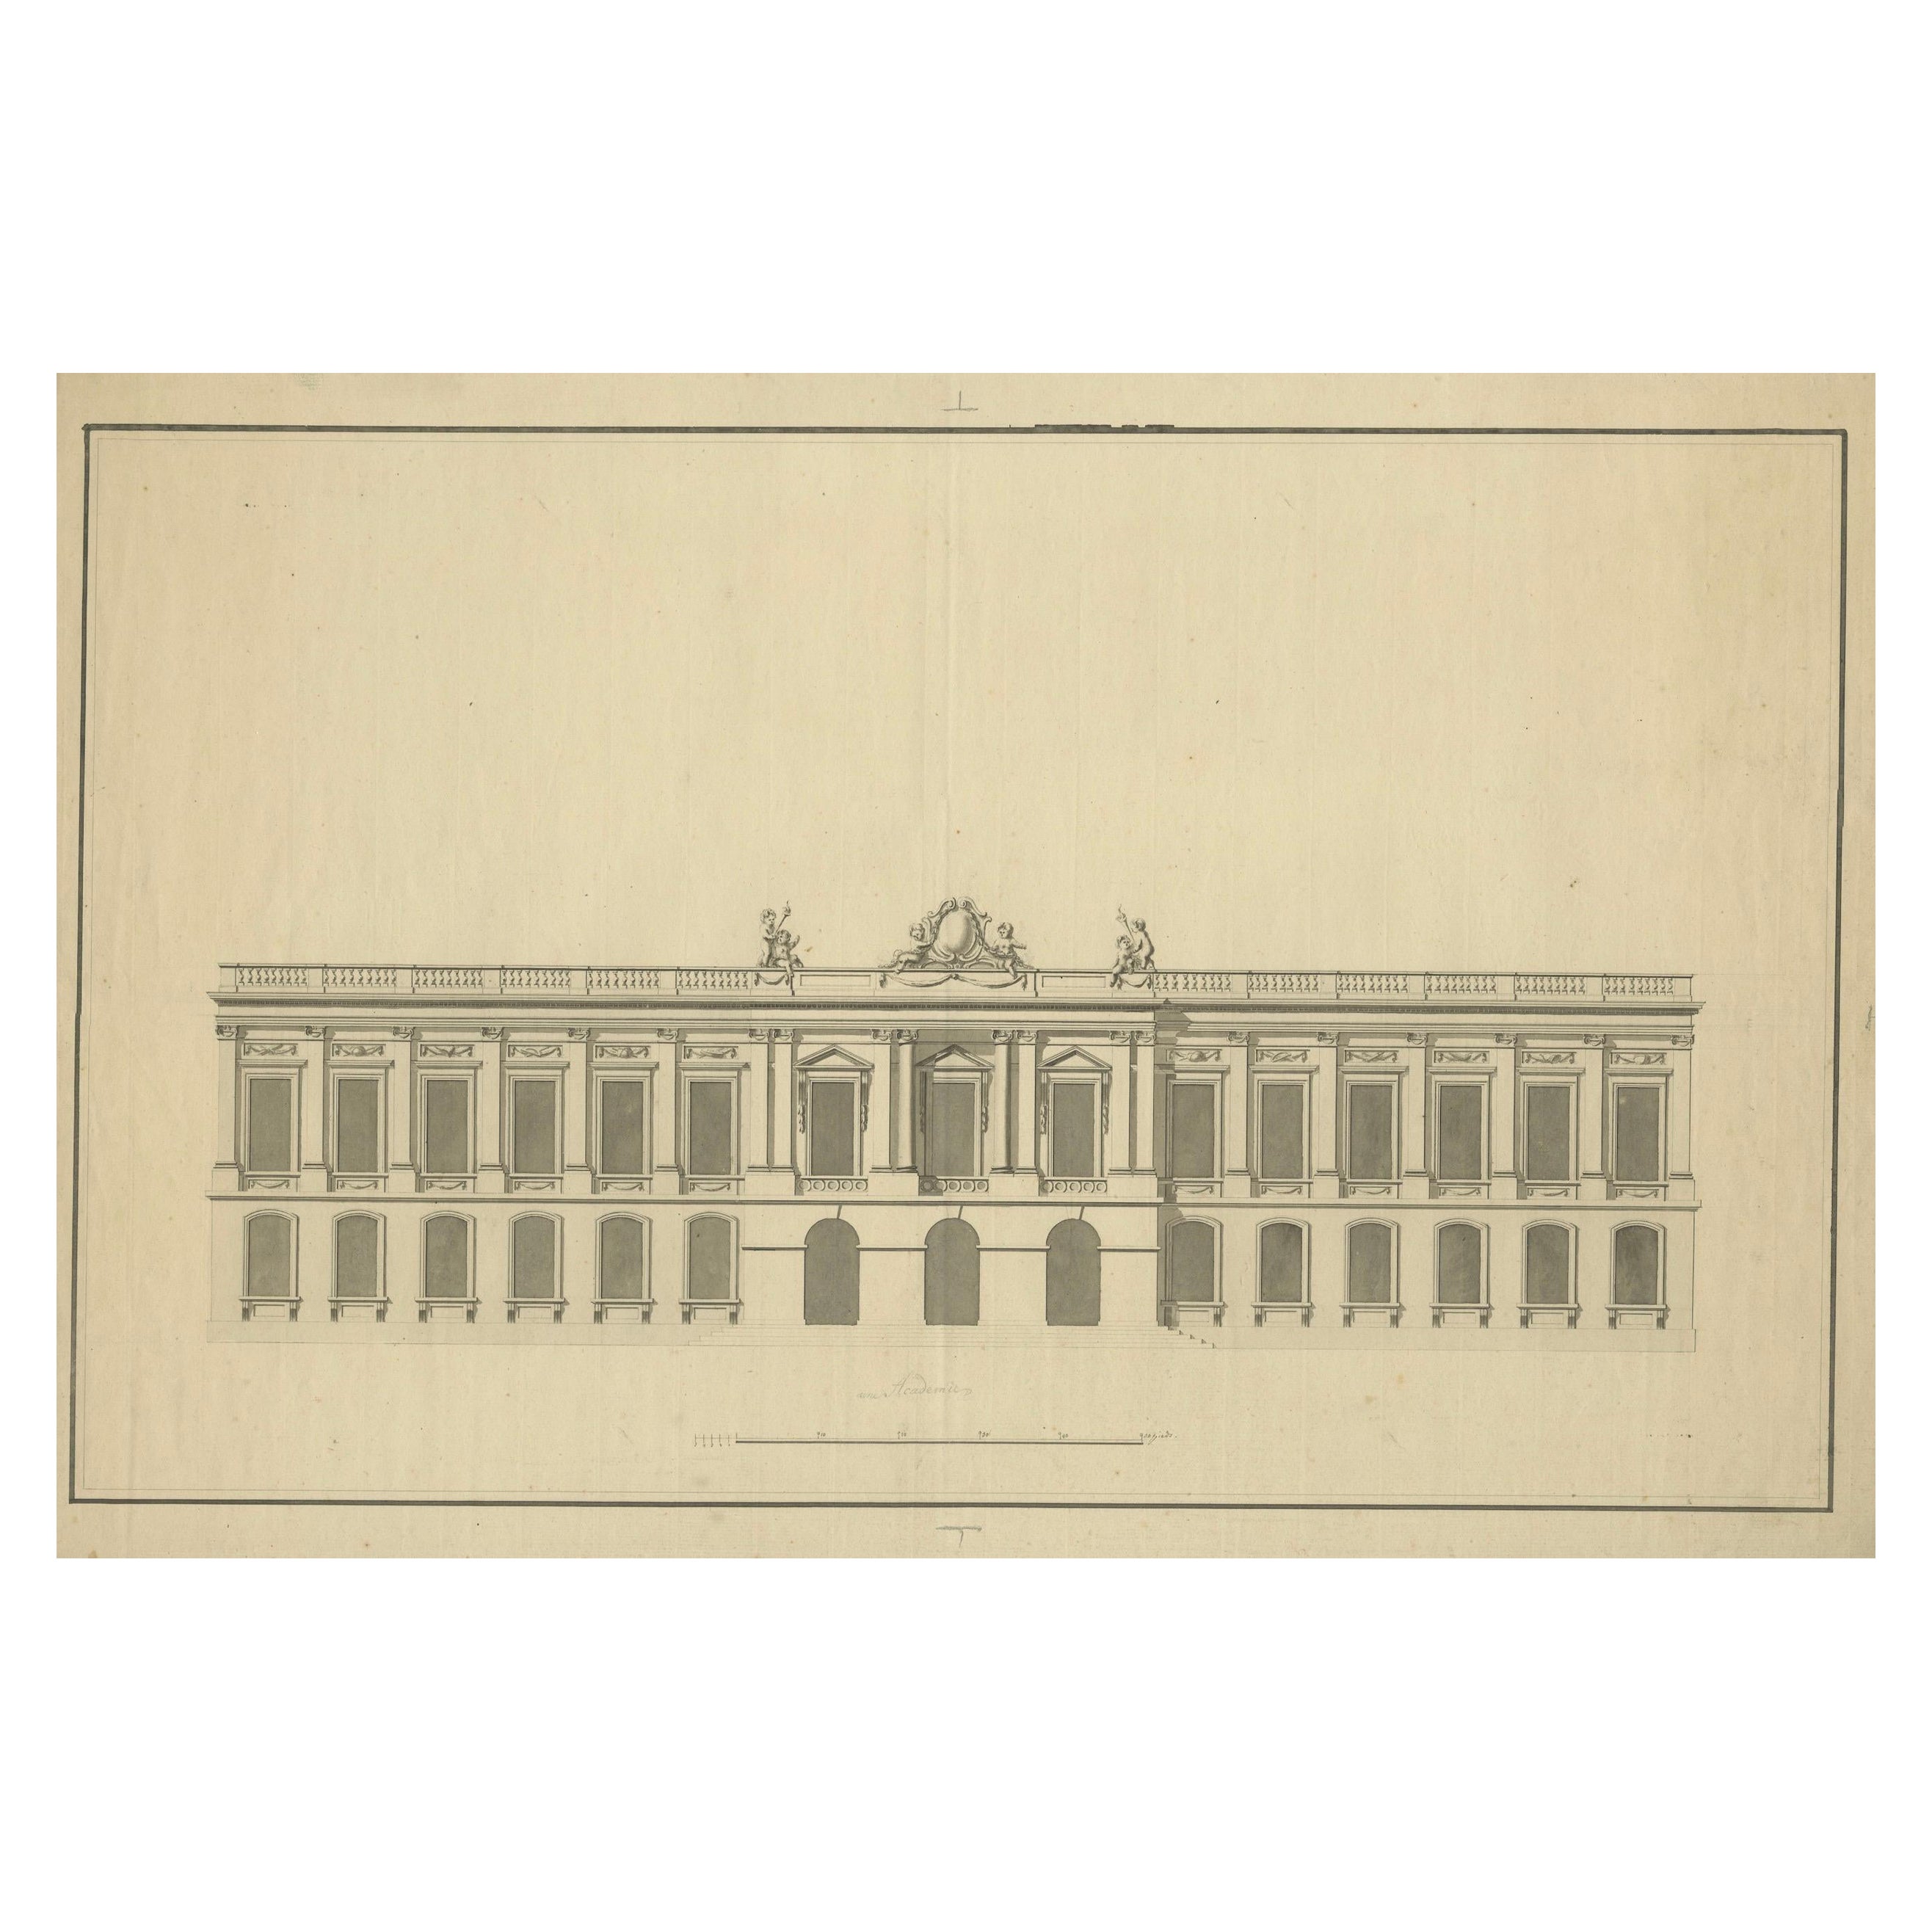 Neoclassical Grandeur: An Architectural Study from the Early 1700s For Sale